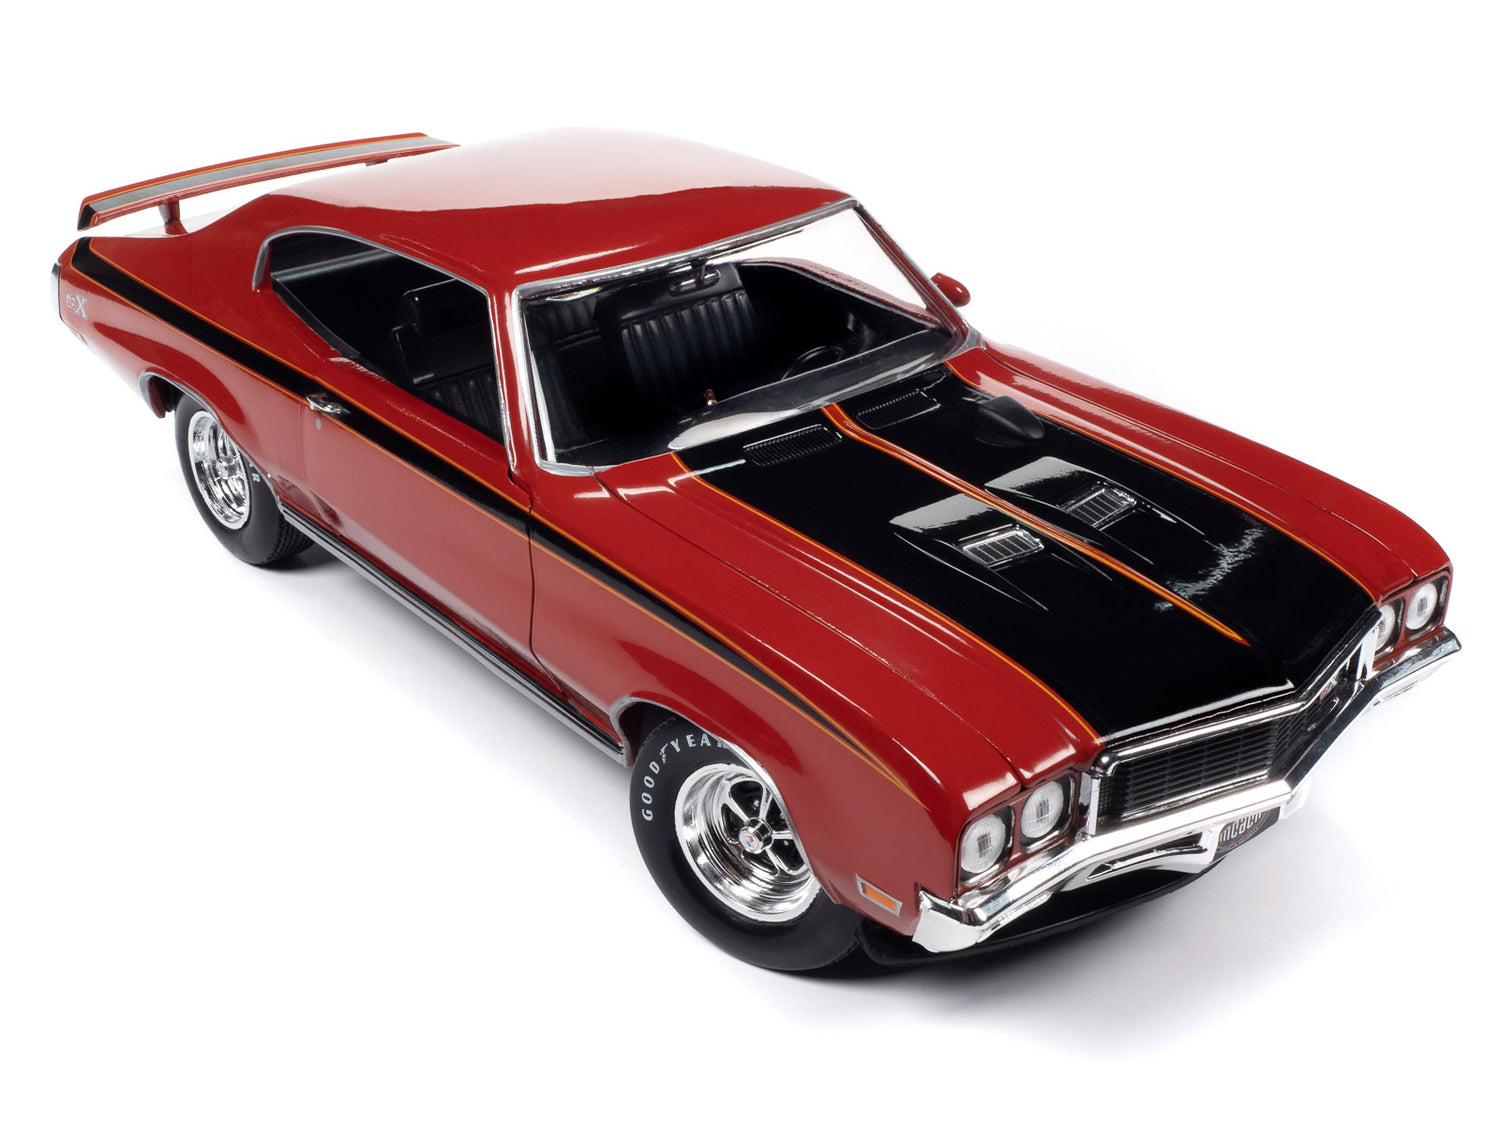 American Muscle 1972 Buick GSX (Class of 1972 & MCACN) 1:18 Scale Diecast